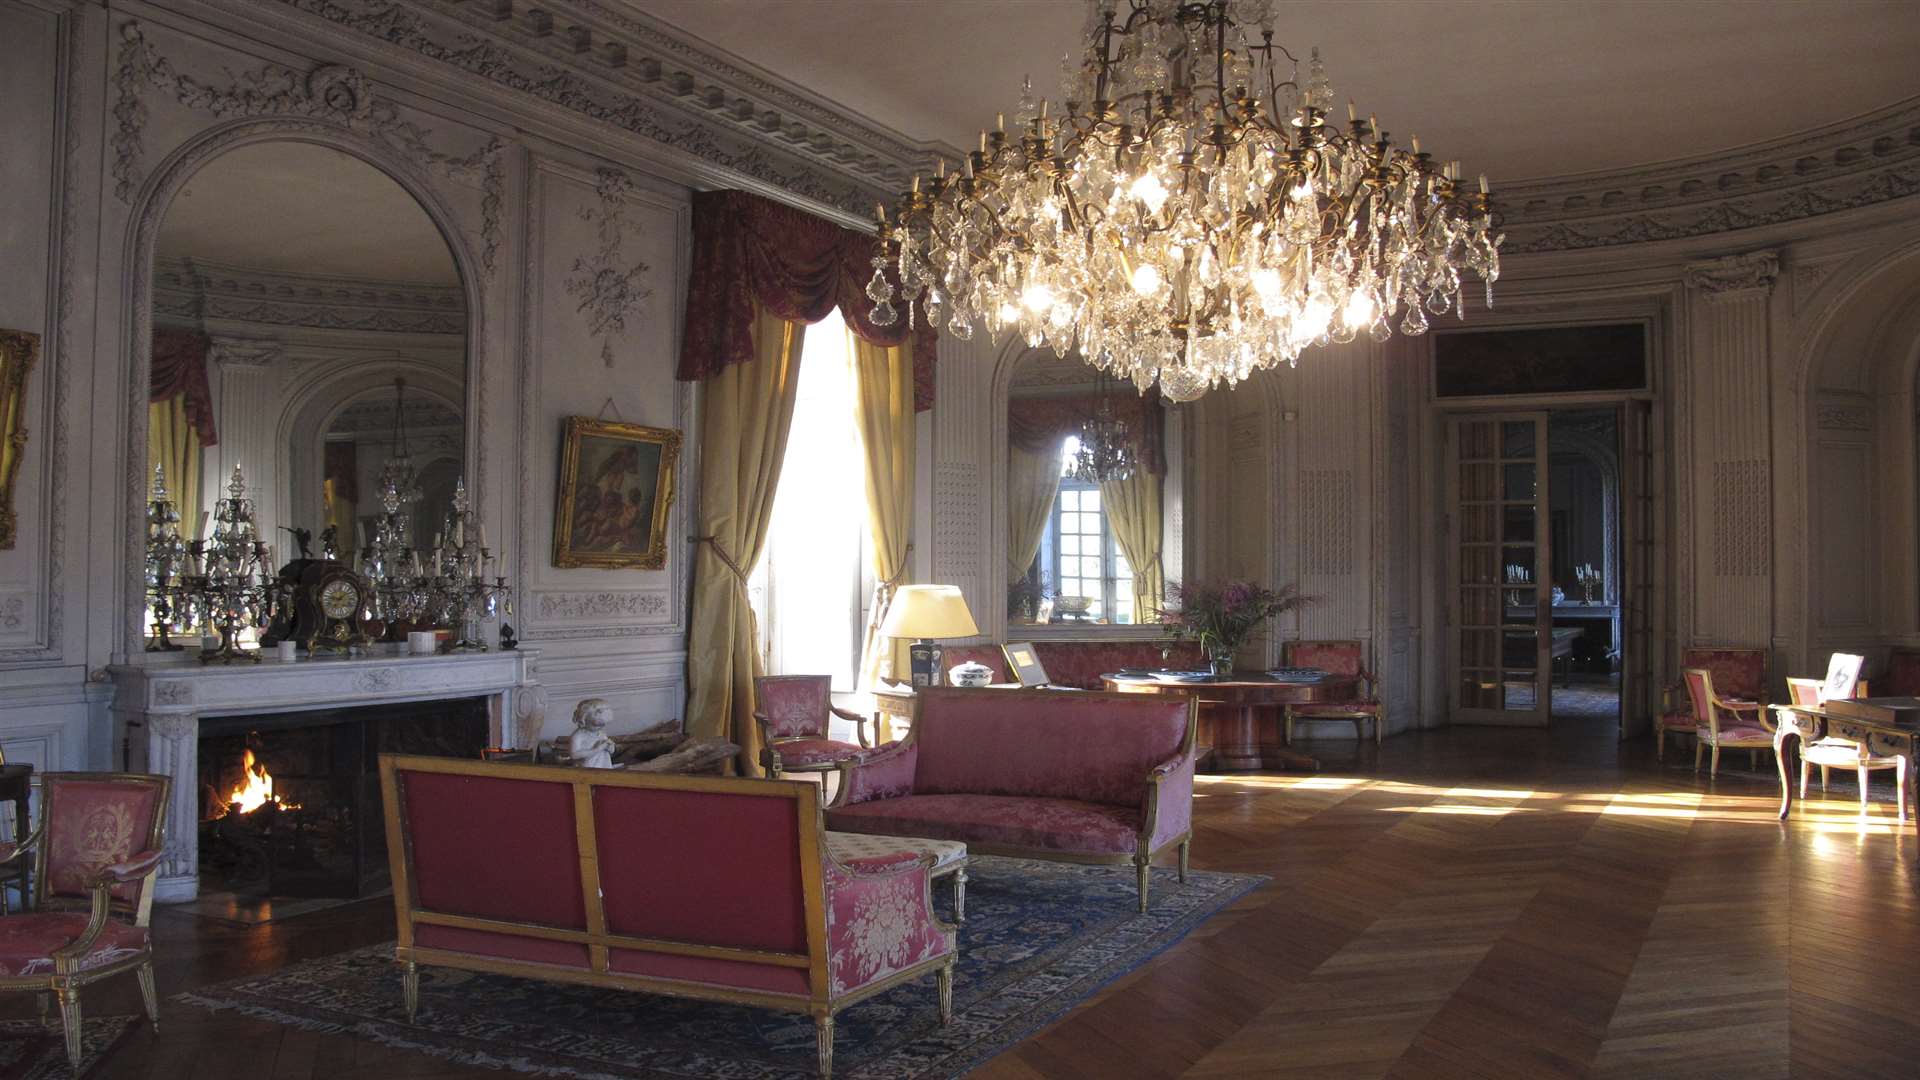 Impressive chandeliers hang in the grand Château du Lude